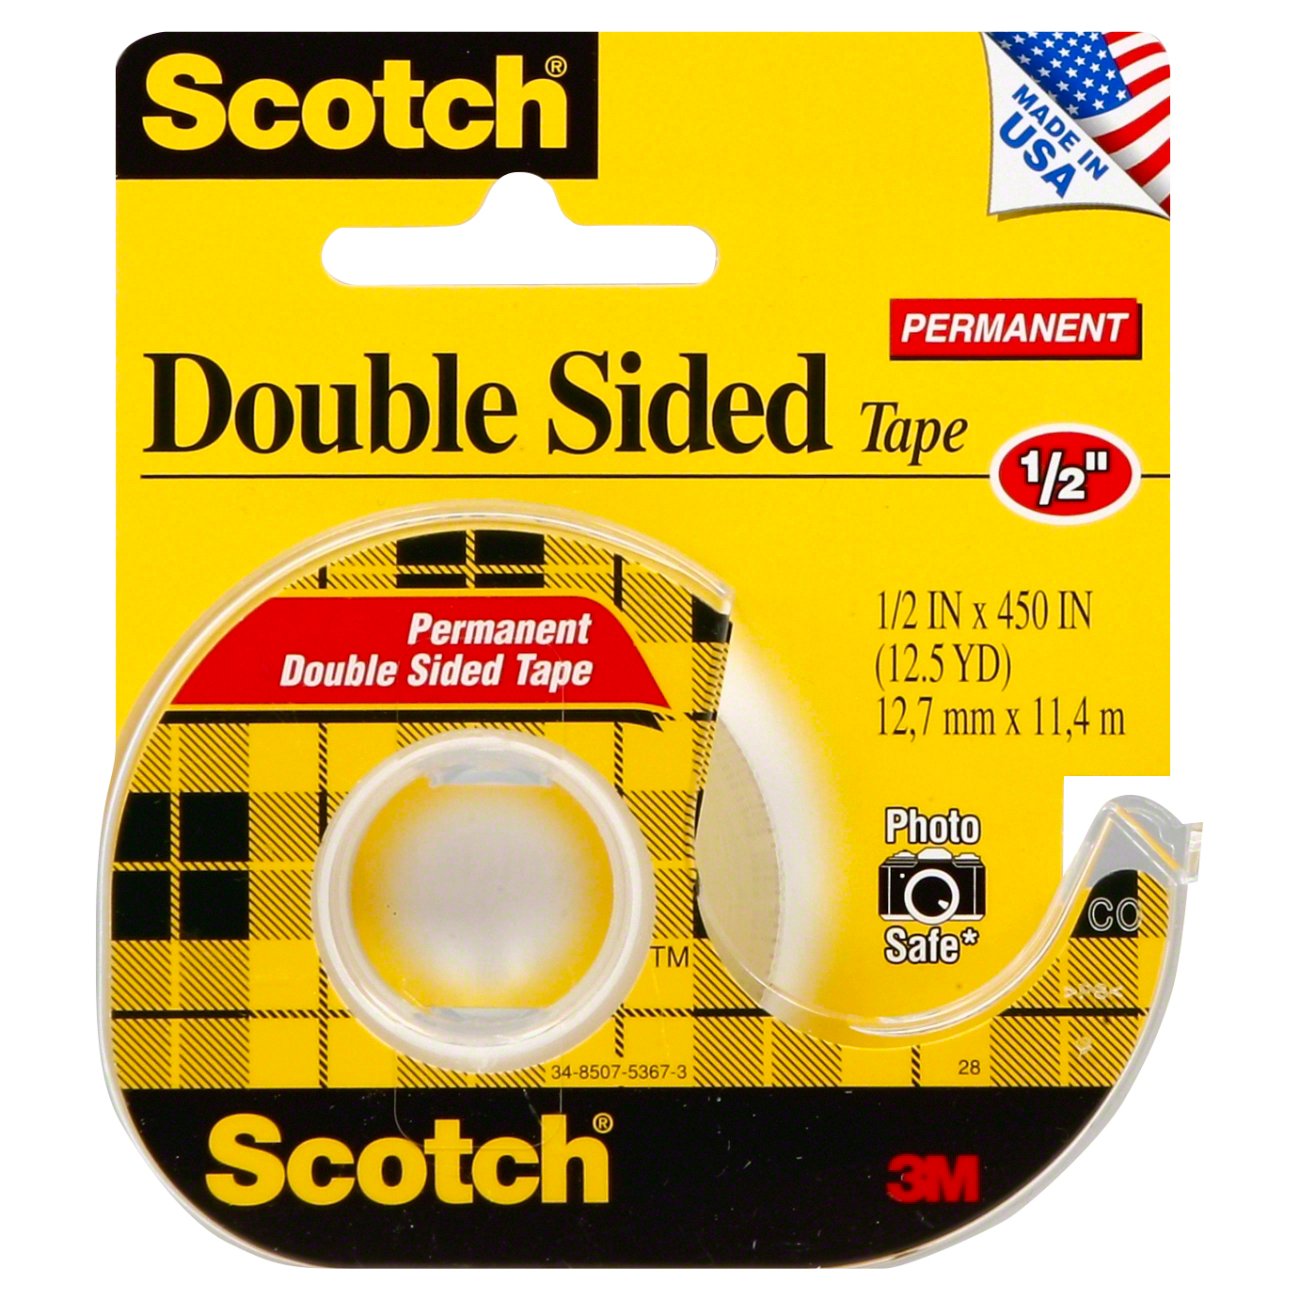 Scotch Double Sided Tape Shop School Office Supplies At H E B